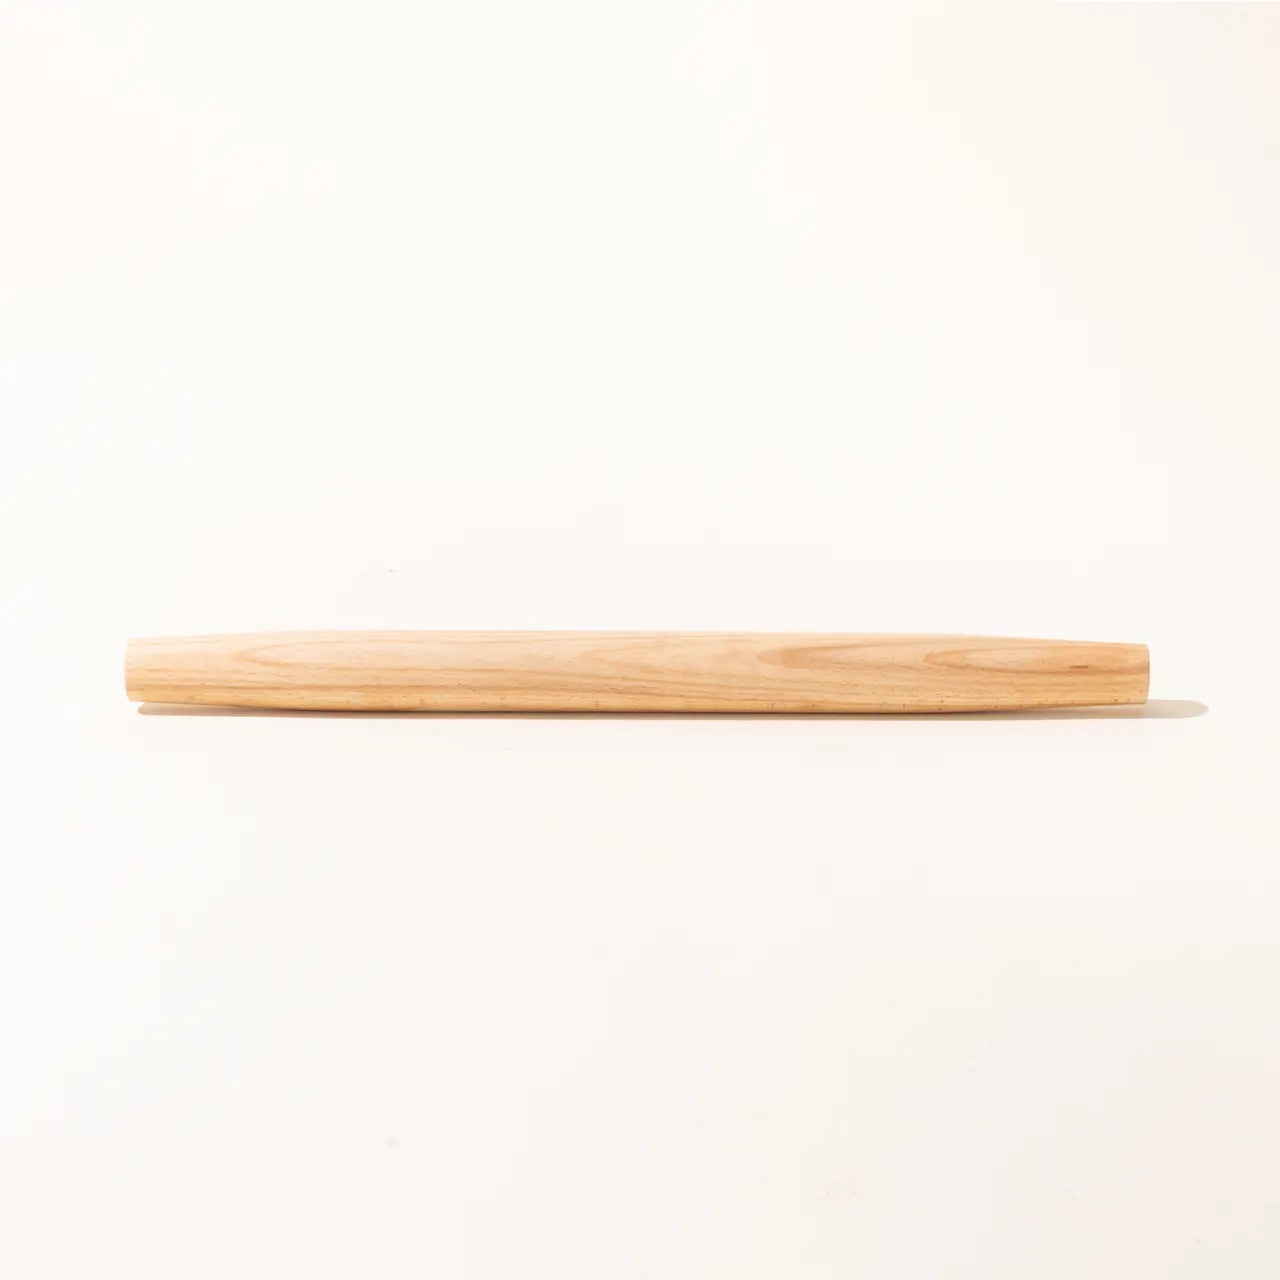 FRENCH ROLLING PIN